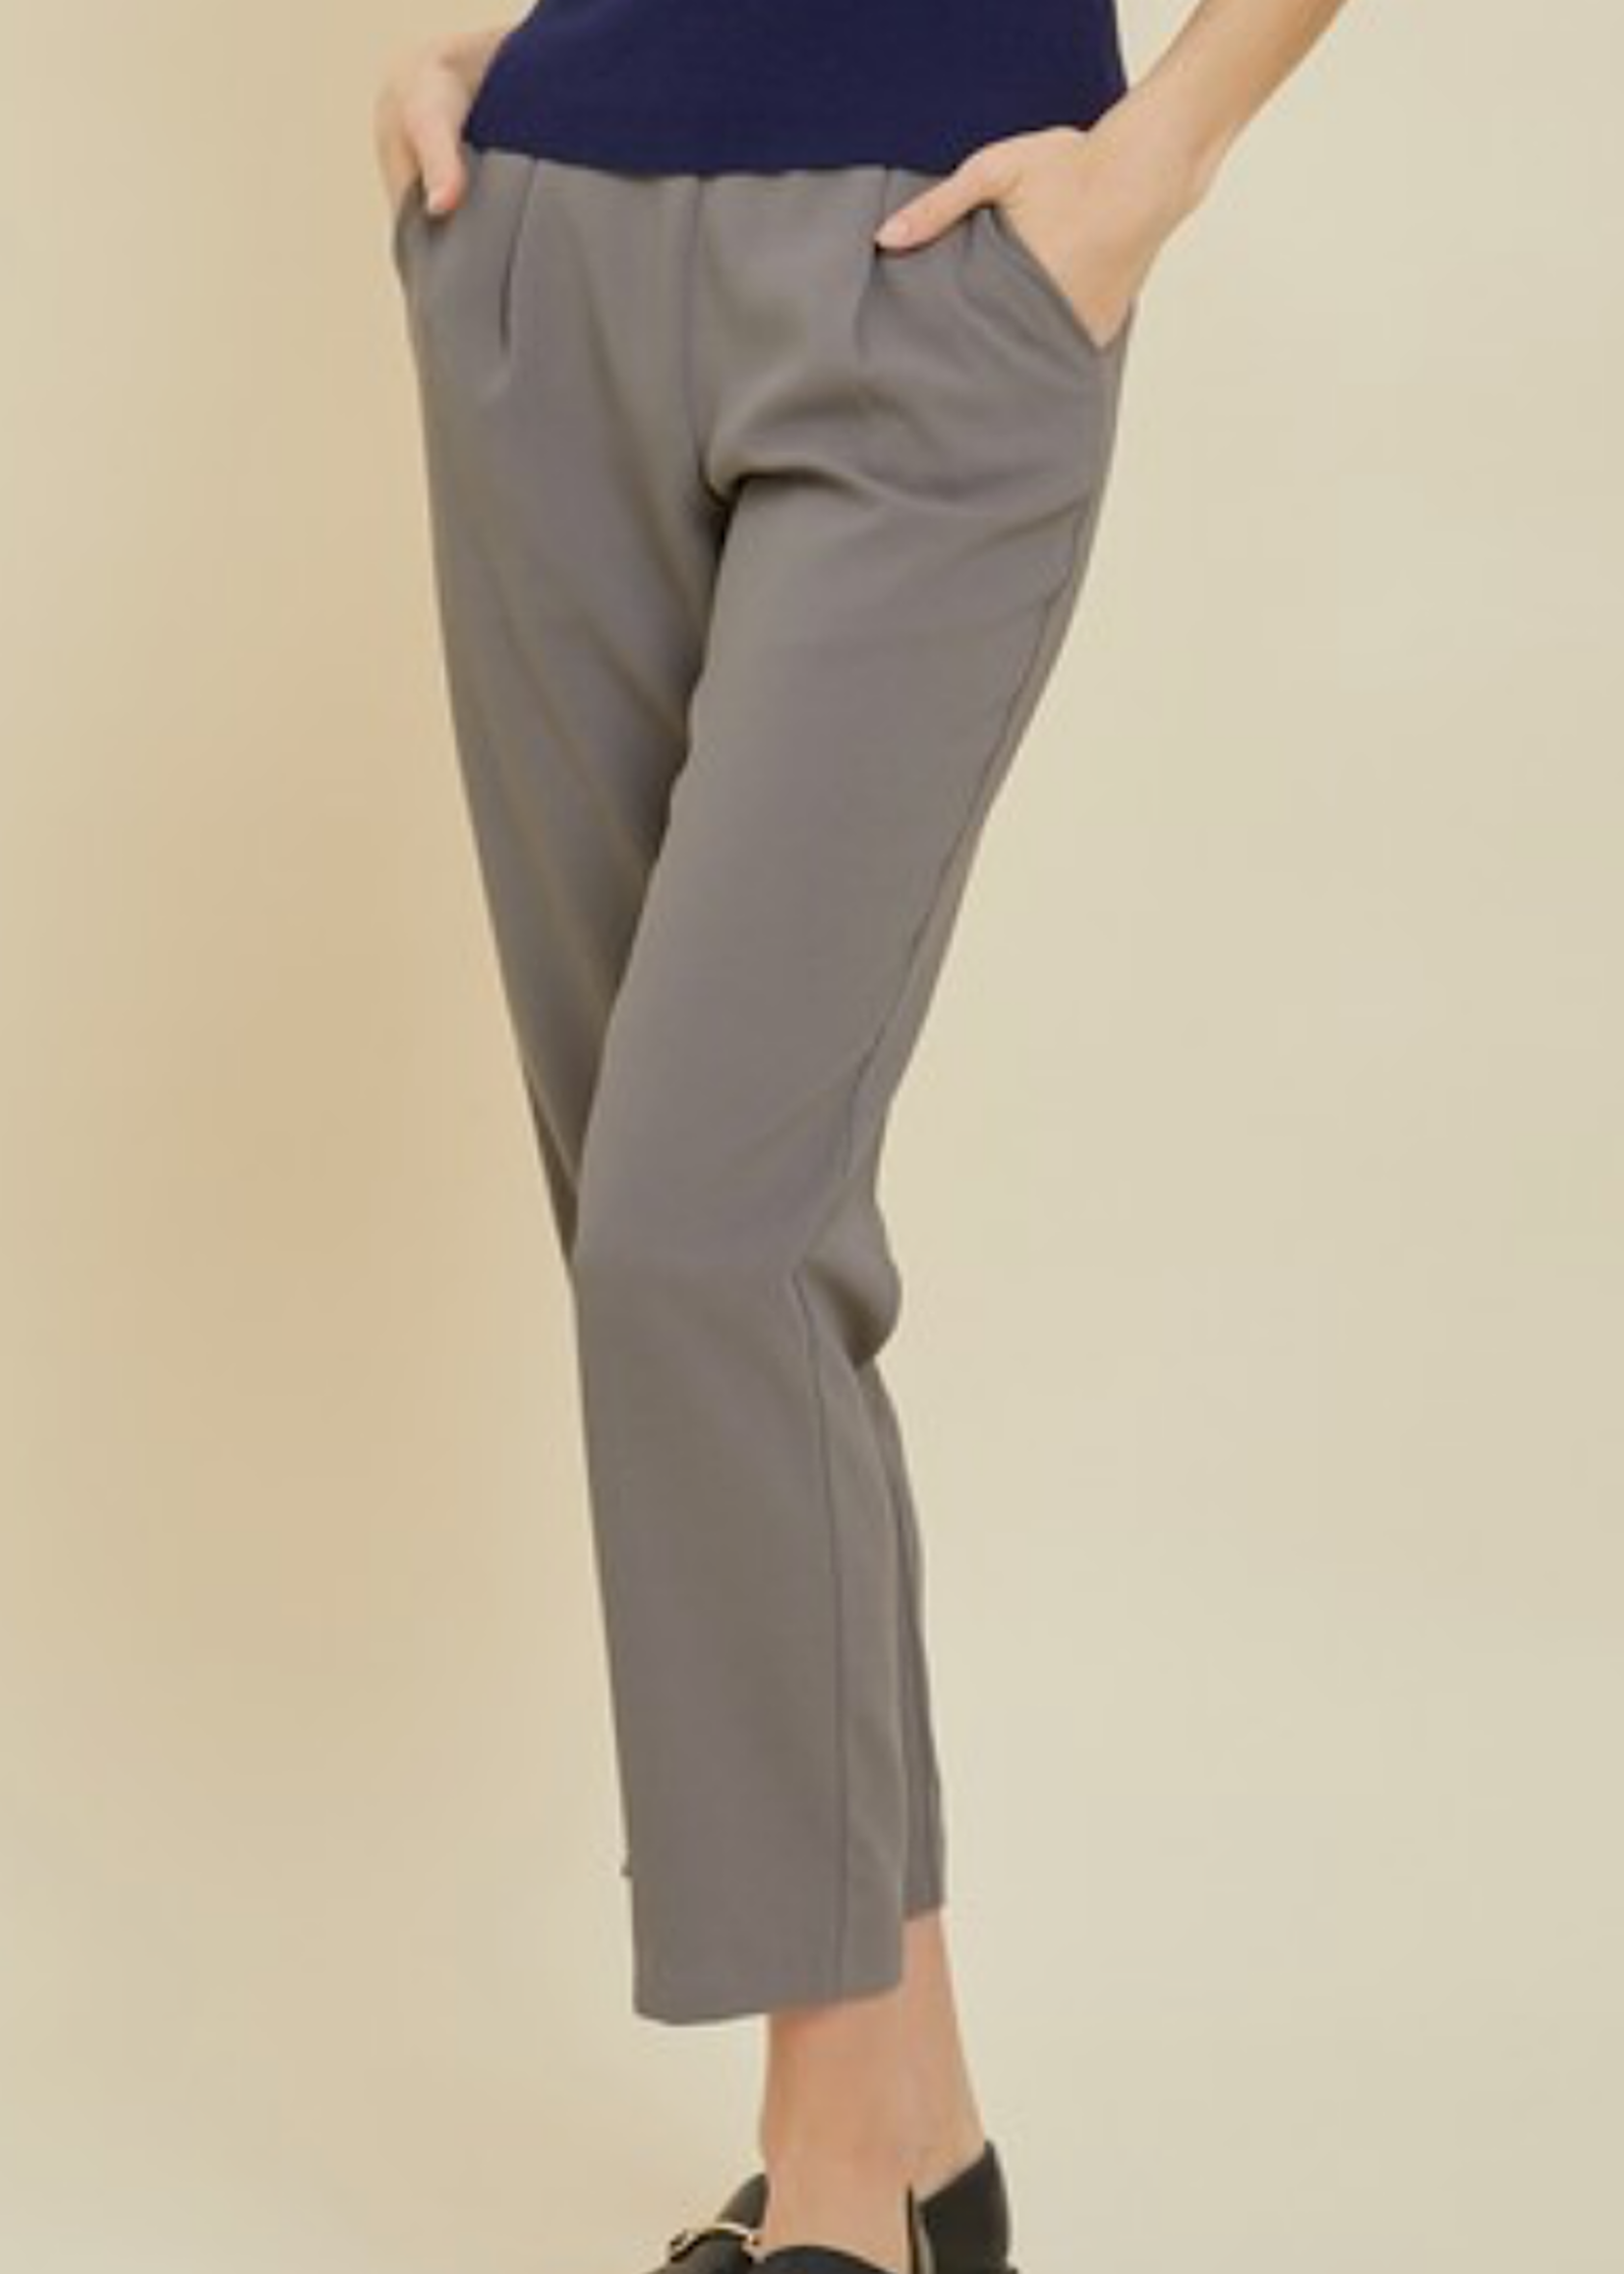 Grey Mid Rise Pant with Elastic Waist and Side Pockets